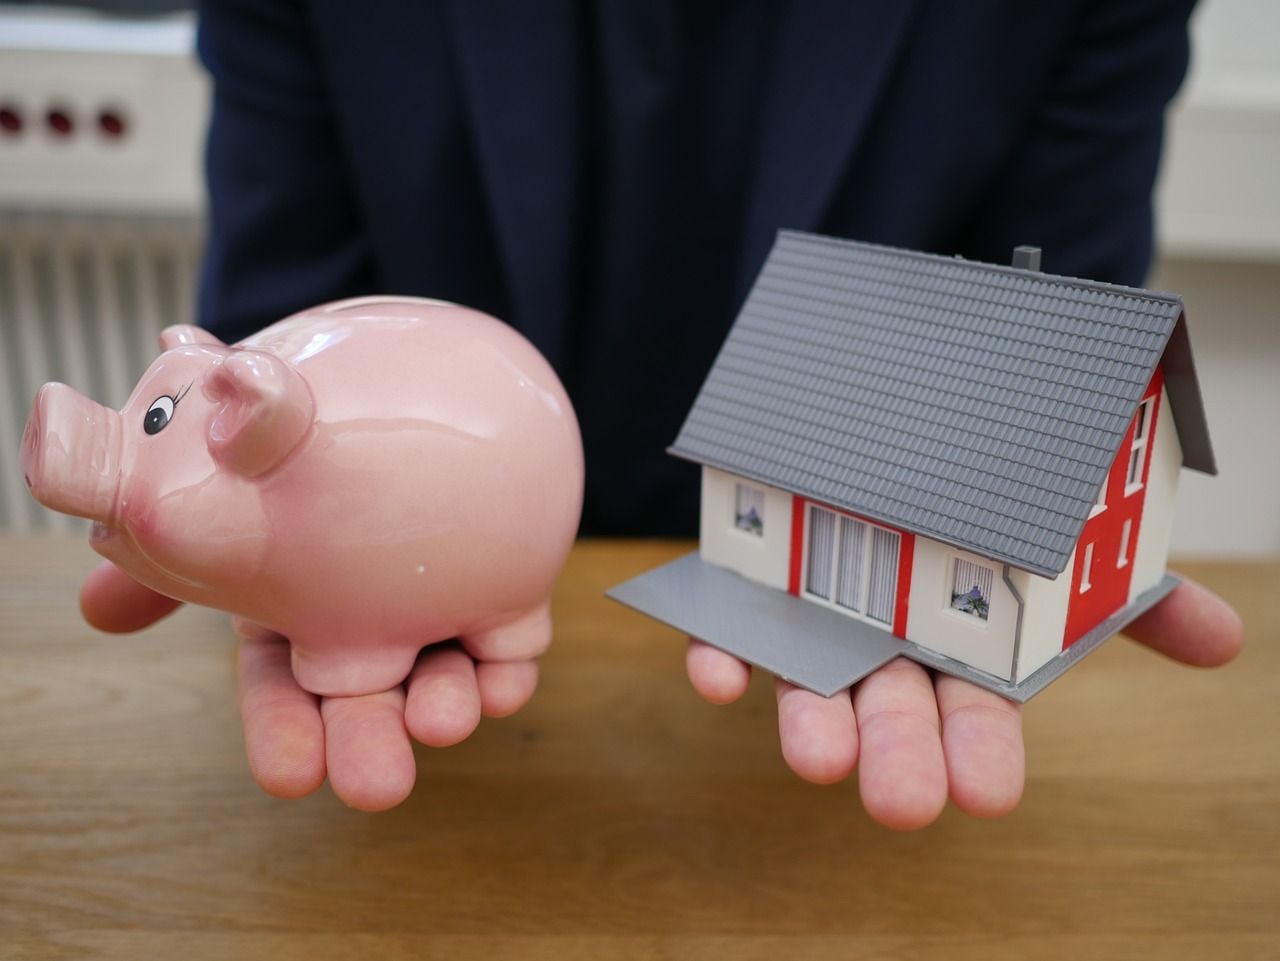 Refinancing vs HELOC: Which is the best option for me?